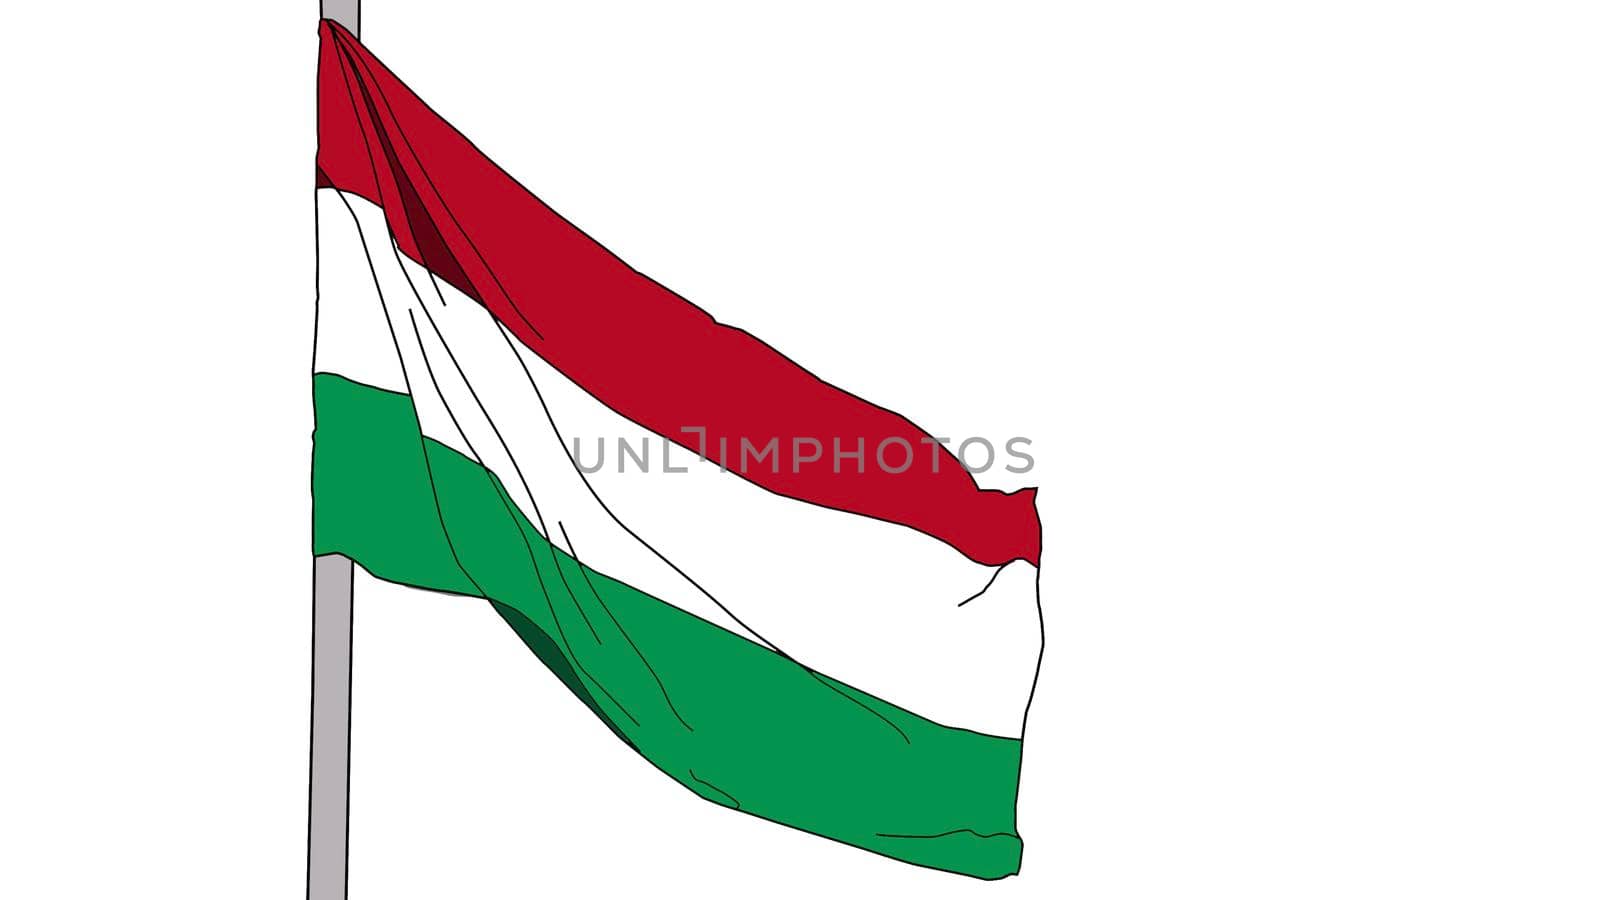 Hungary national day greeting card, banner, horizontal illustration. Hungarian holiday 15th of March design element with waving flag as a symbol of independence.